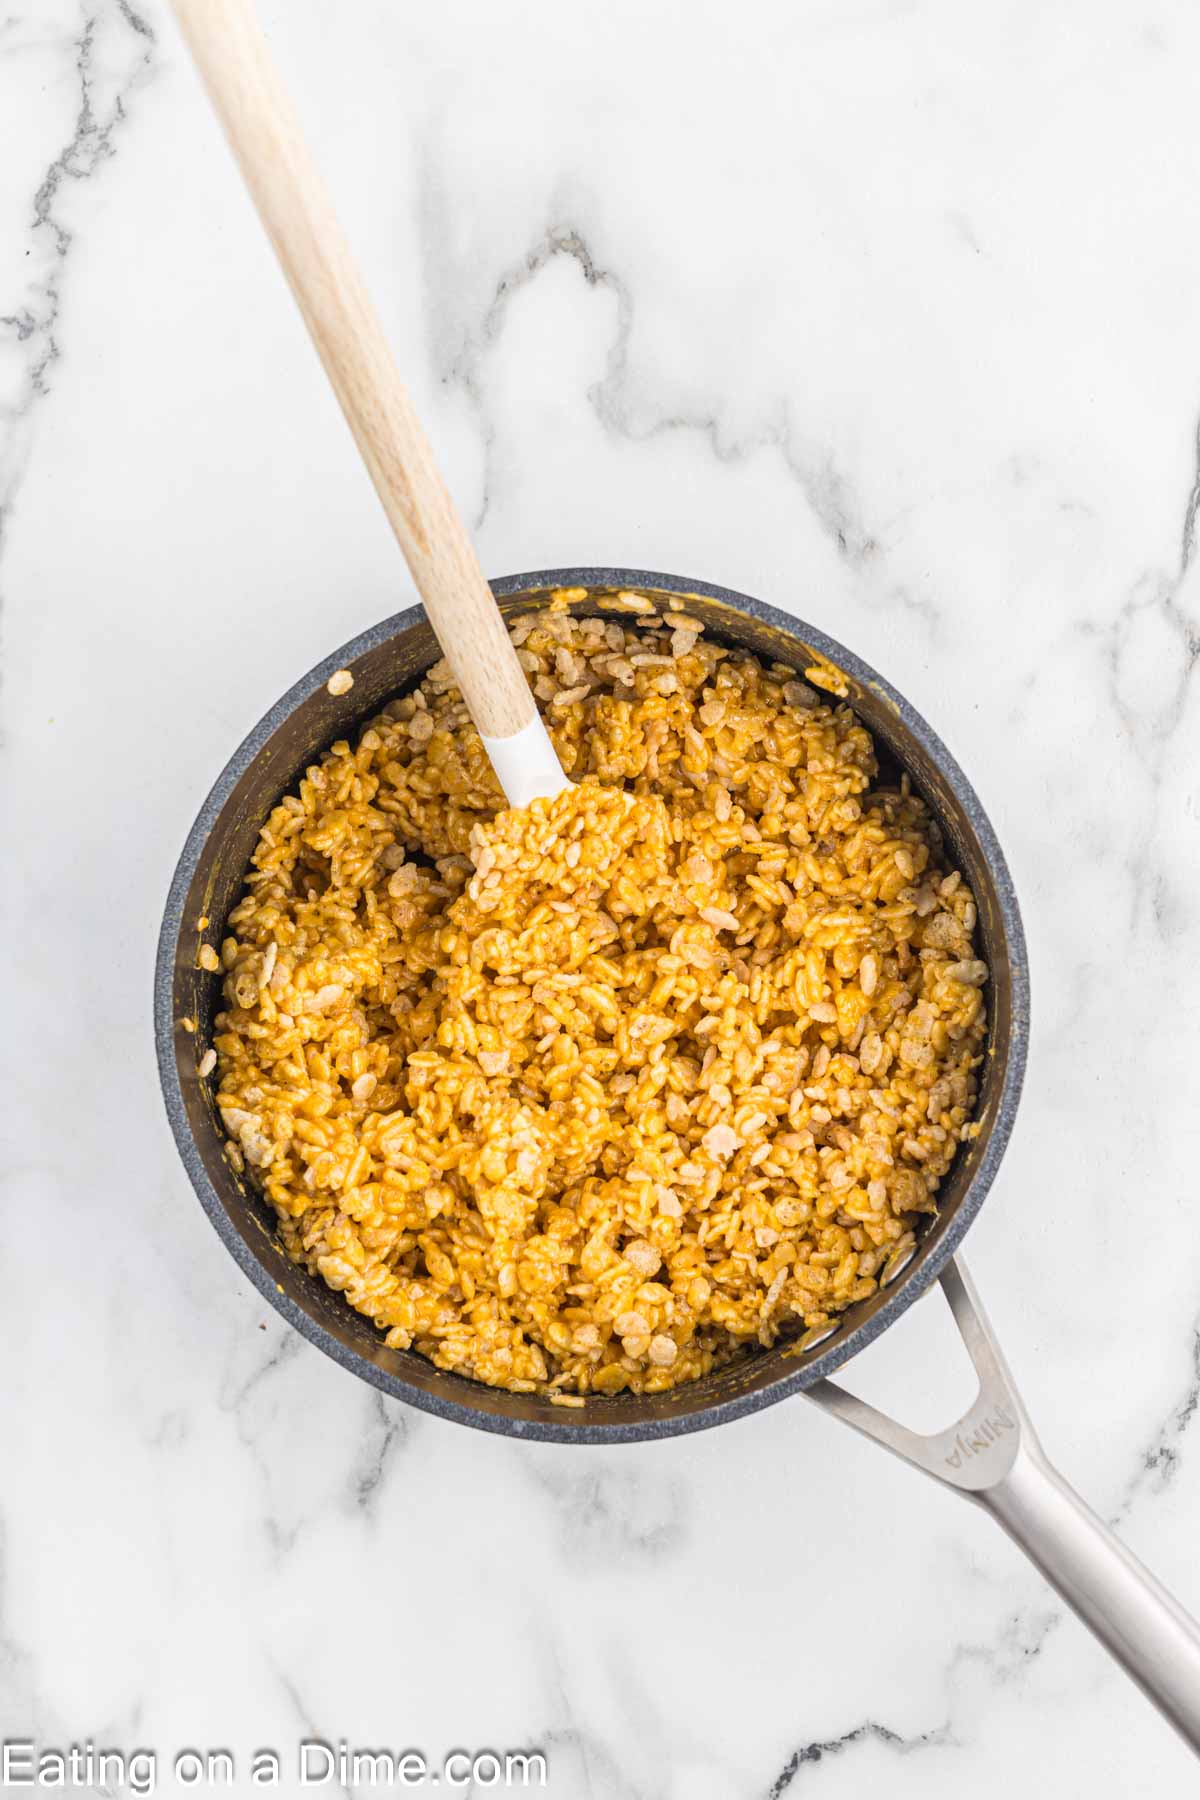 A pot of seasoned rice with a wooden spoon on a marble countertop. The rice, reminiscent of pumpkin rice krispie treats, appears well-cooked and mixed with spices, giving it a rich, golden-brown color.